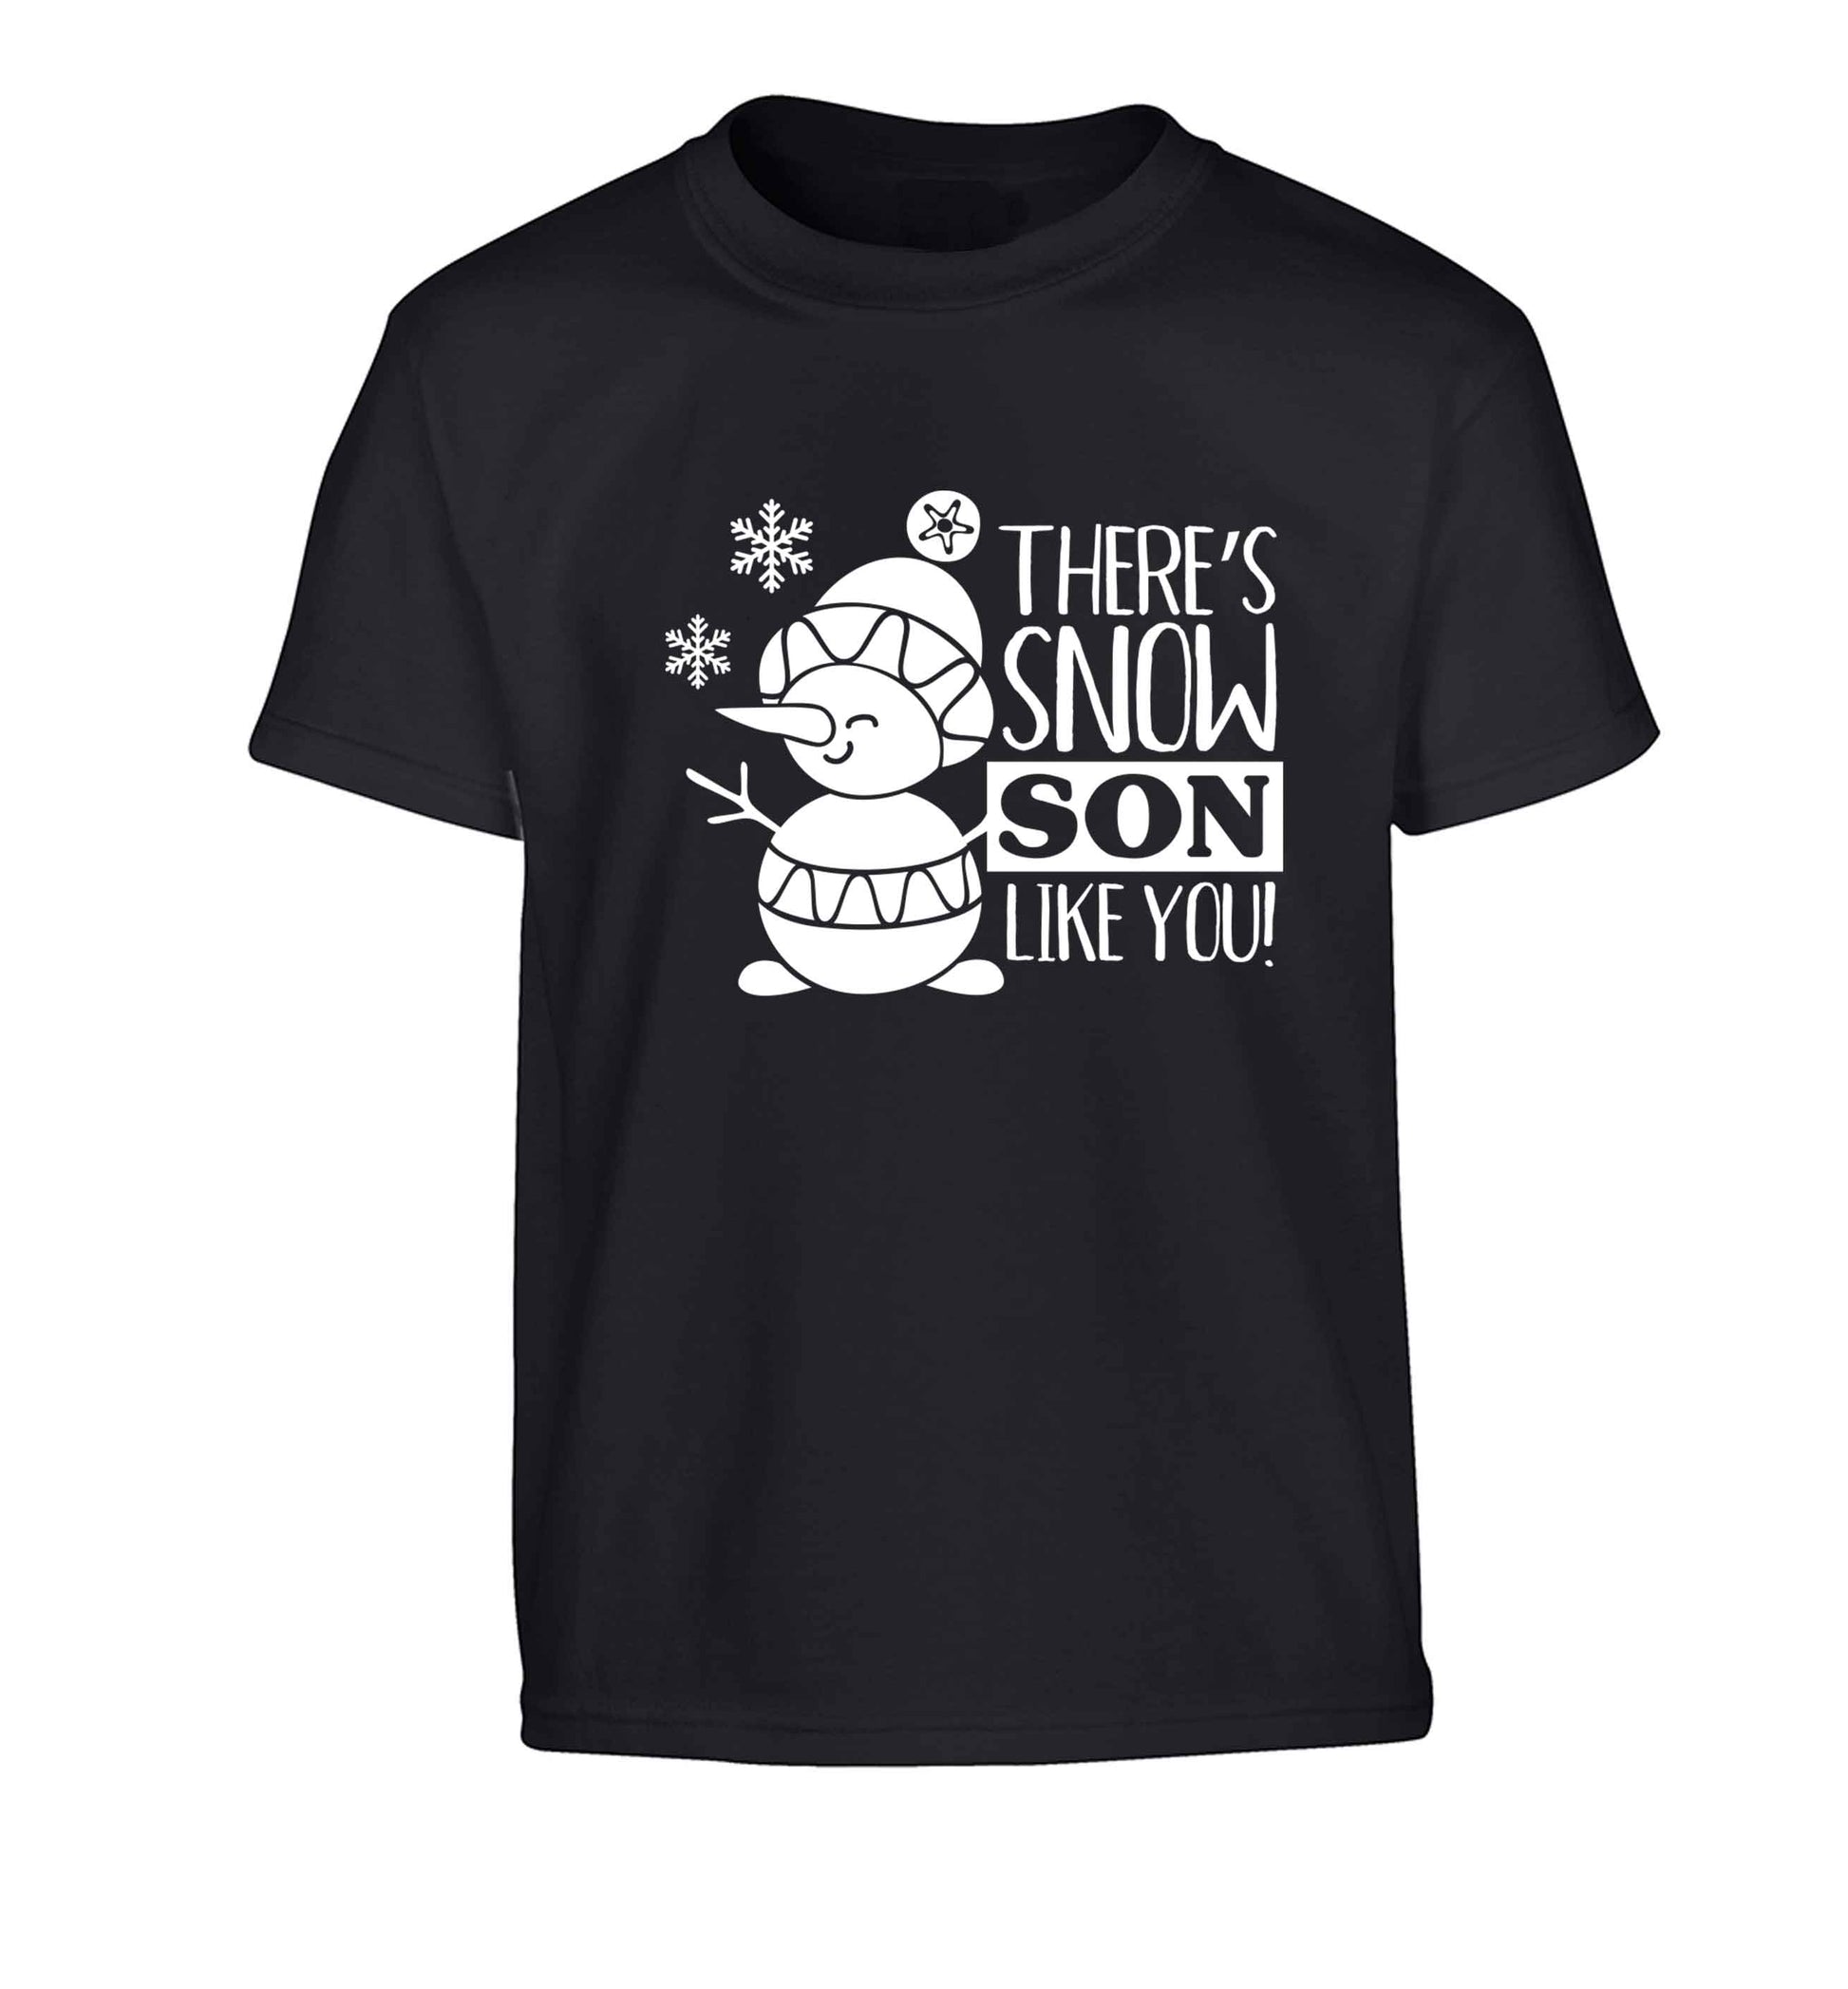 There's snow son like you Children's black Tshirt 12-13 Years